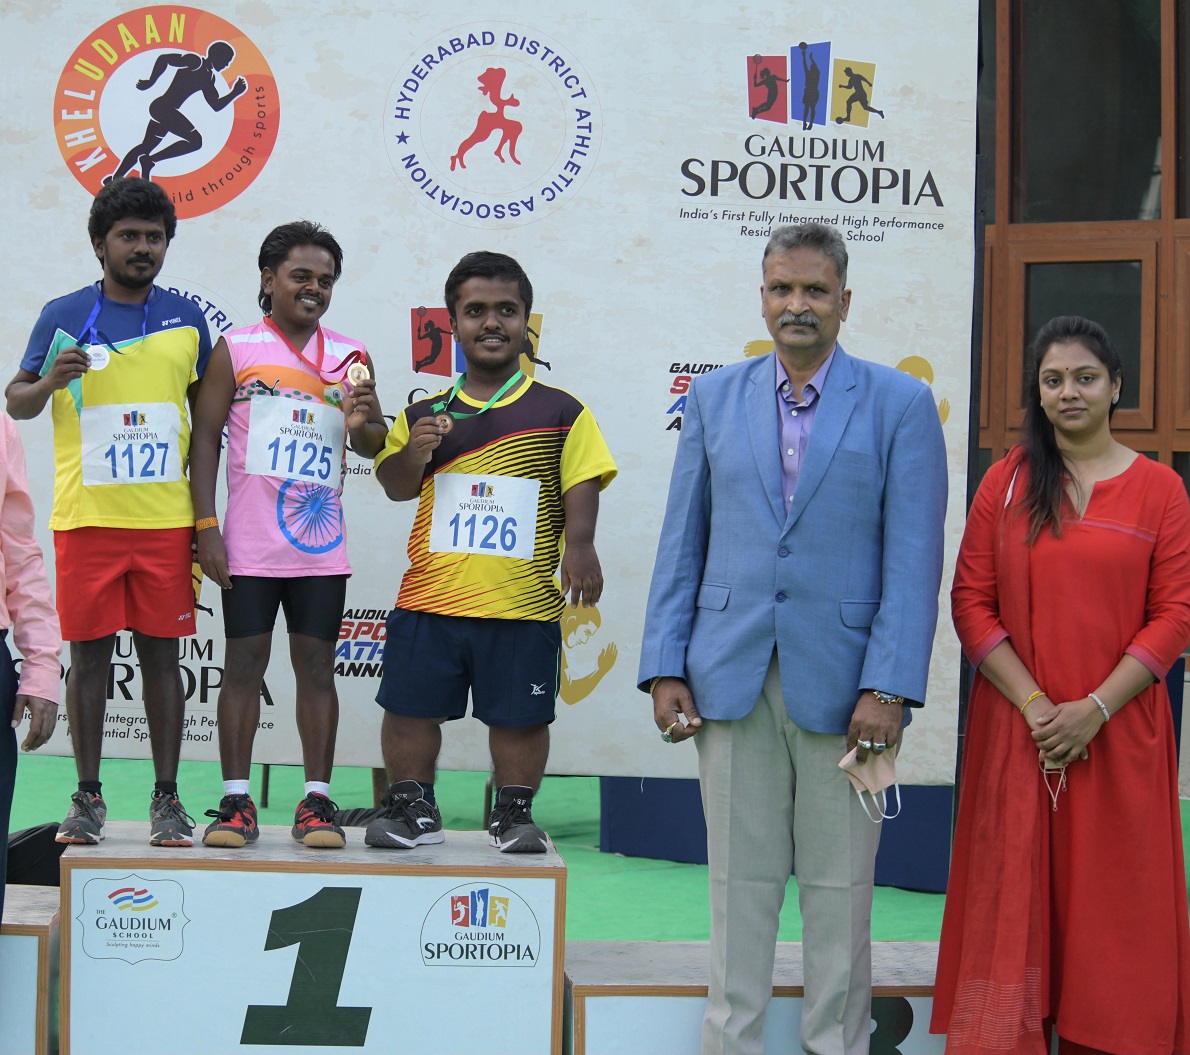 Special Category Boys Winners: Siva - 1st place, P Dinakaran - 2nd place & Sudarsan - 3rd place, at the First Edition of the Gaudium Sportopia Athletics Annual Meet, organized by the Gaudium Sportopia, Hyderabad District Athletic Association & the Khel Udaan initiative, today at The Gaudium School, Kollur Campus, also seen are (L-R) Mr Stanly, President, Telangana State Athletics Association & Technical Committee Chairman, Athletics Federation of India & Ms Kirthi Reddy, Director, The Gaudium.